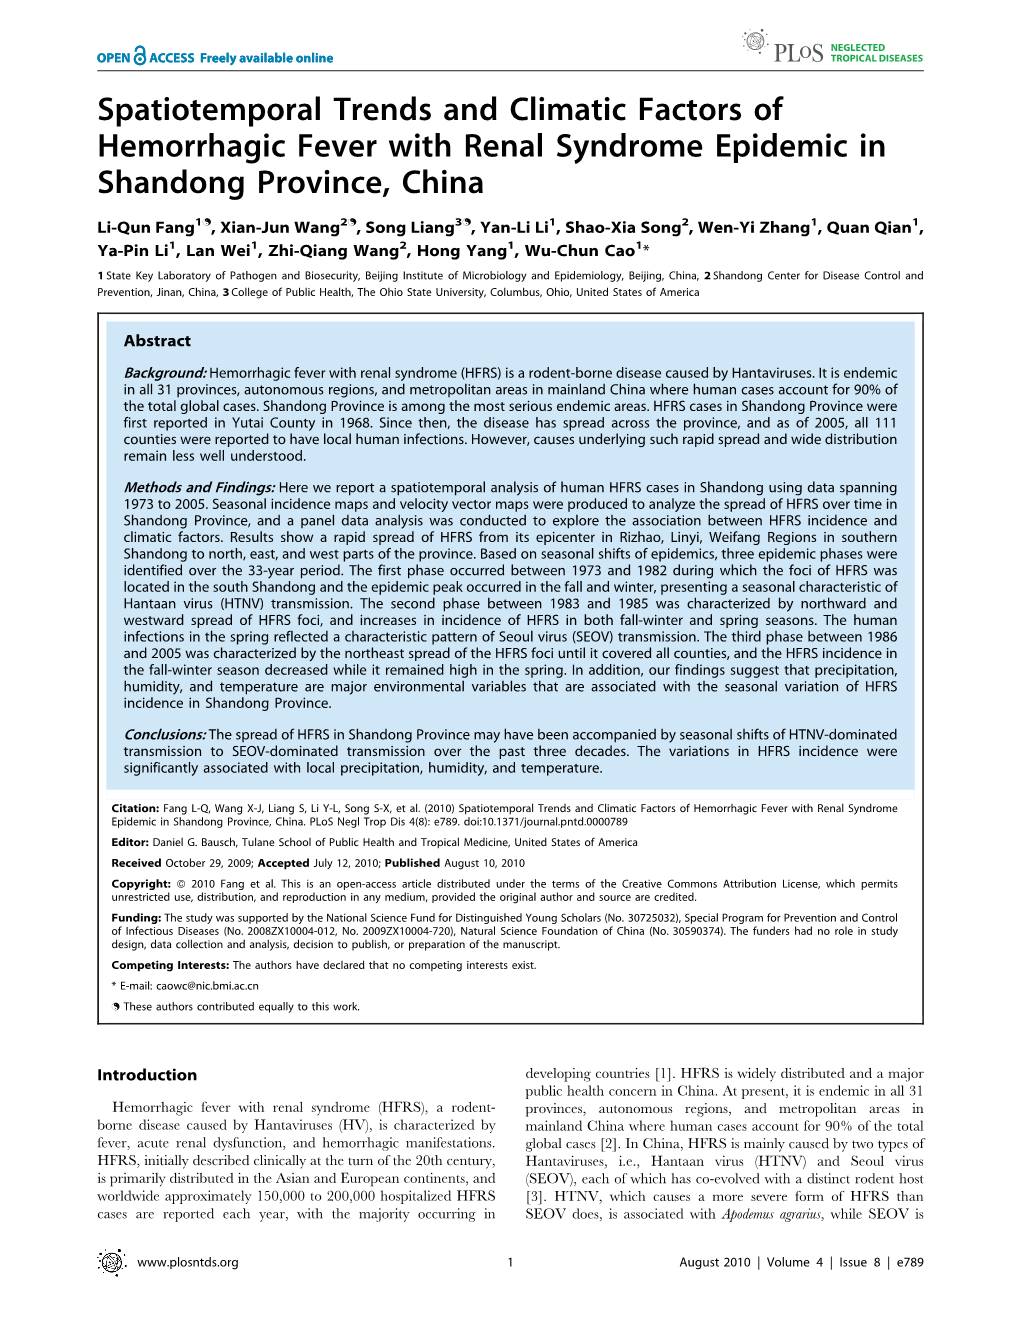 Spatiotemporal Trends and Climatic Factors of Hemorrhagic Fever with Renal Syndrome Epidemic in Shandong Province, China